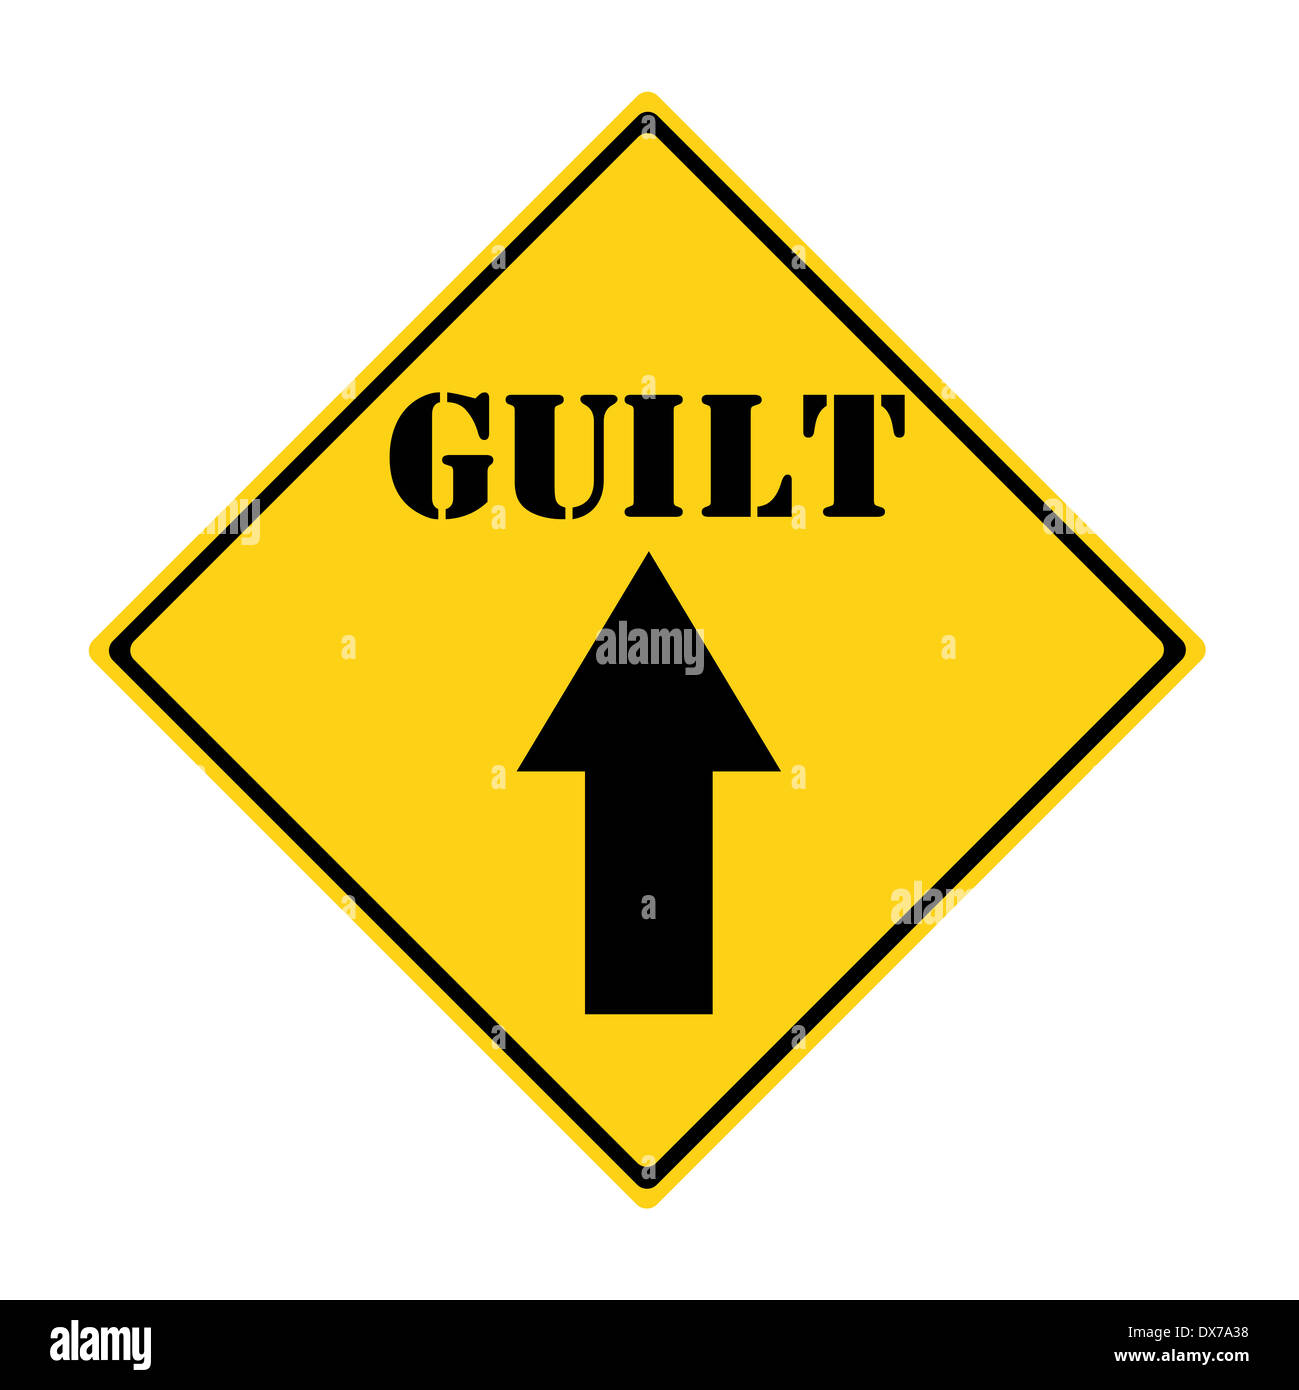 A yellow and black diamond shaped road sign with the word GUILT and an arrow pointing the way making a great concept. Stock Photo